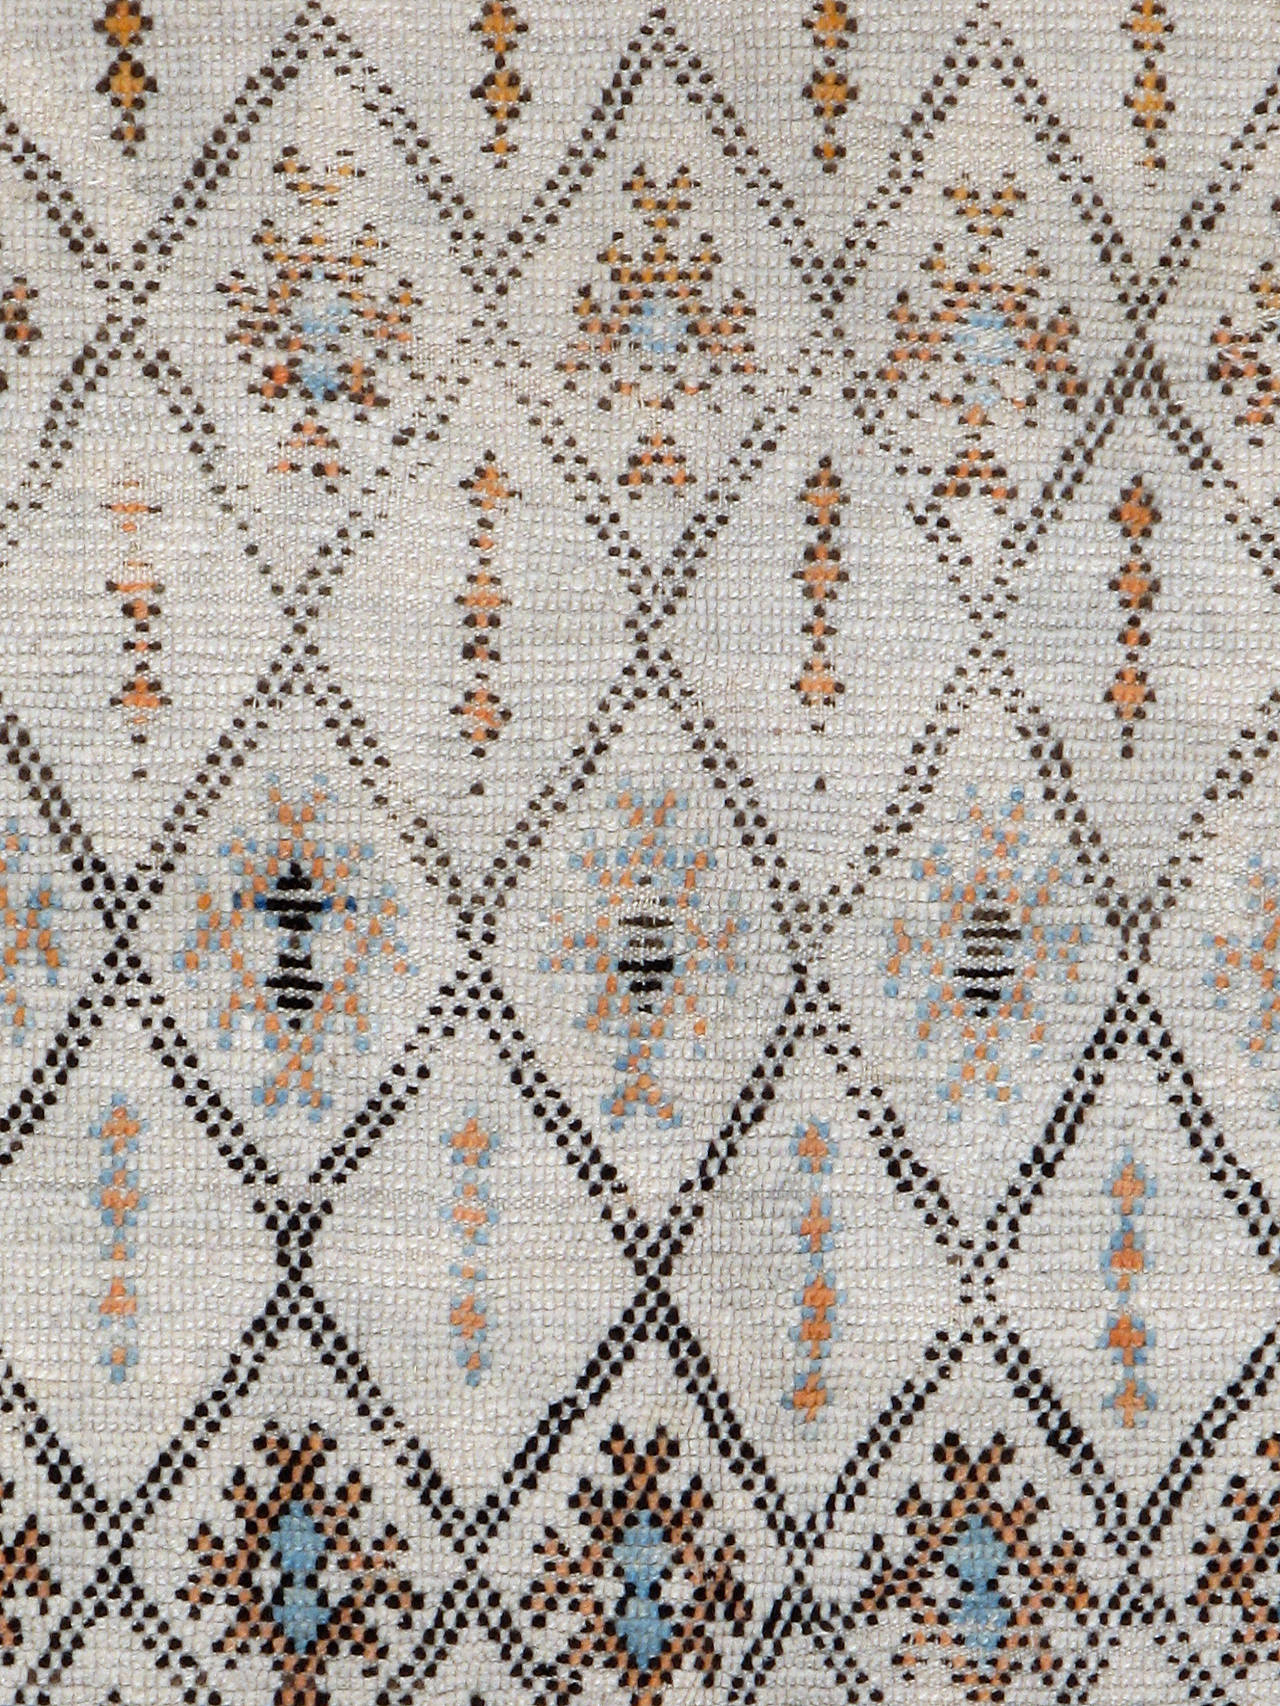 A vintage Moroccan carpet from the second quarter of the 20th century.